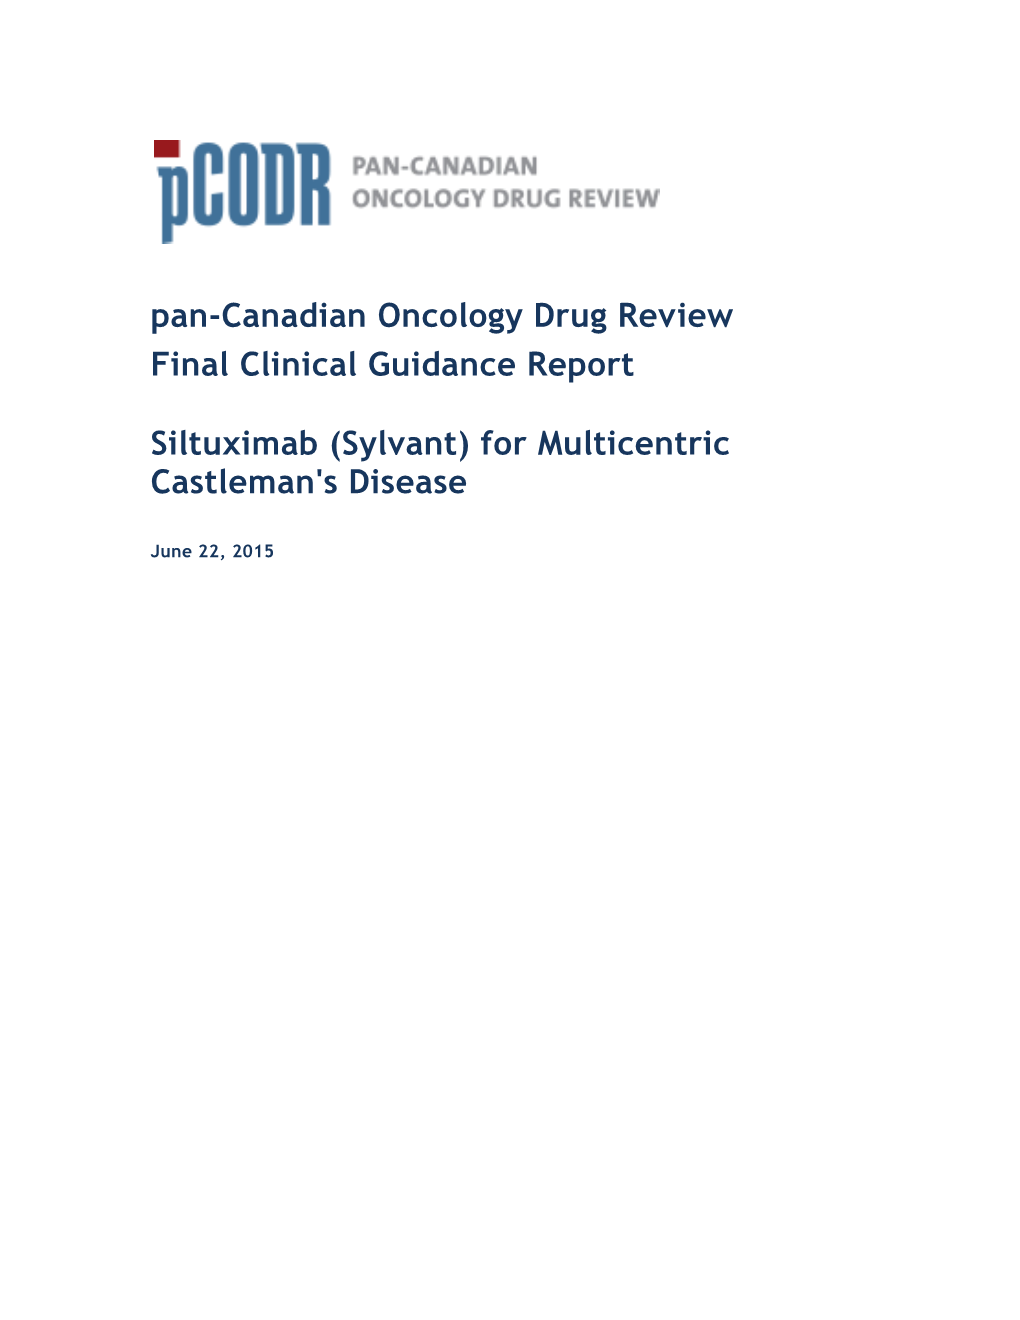 Pan-Canadian Oncology Drug Review Final Clinical Guidance Report